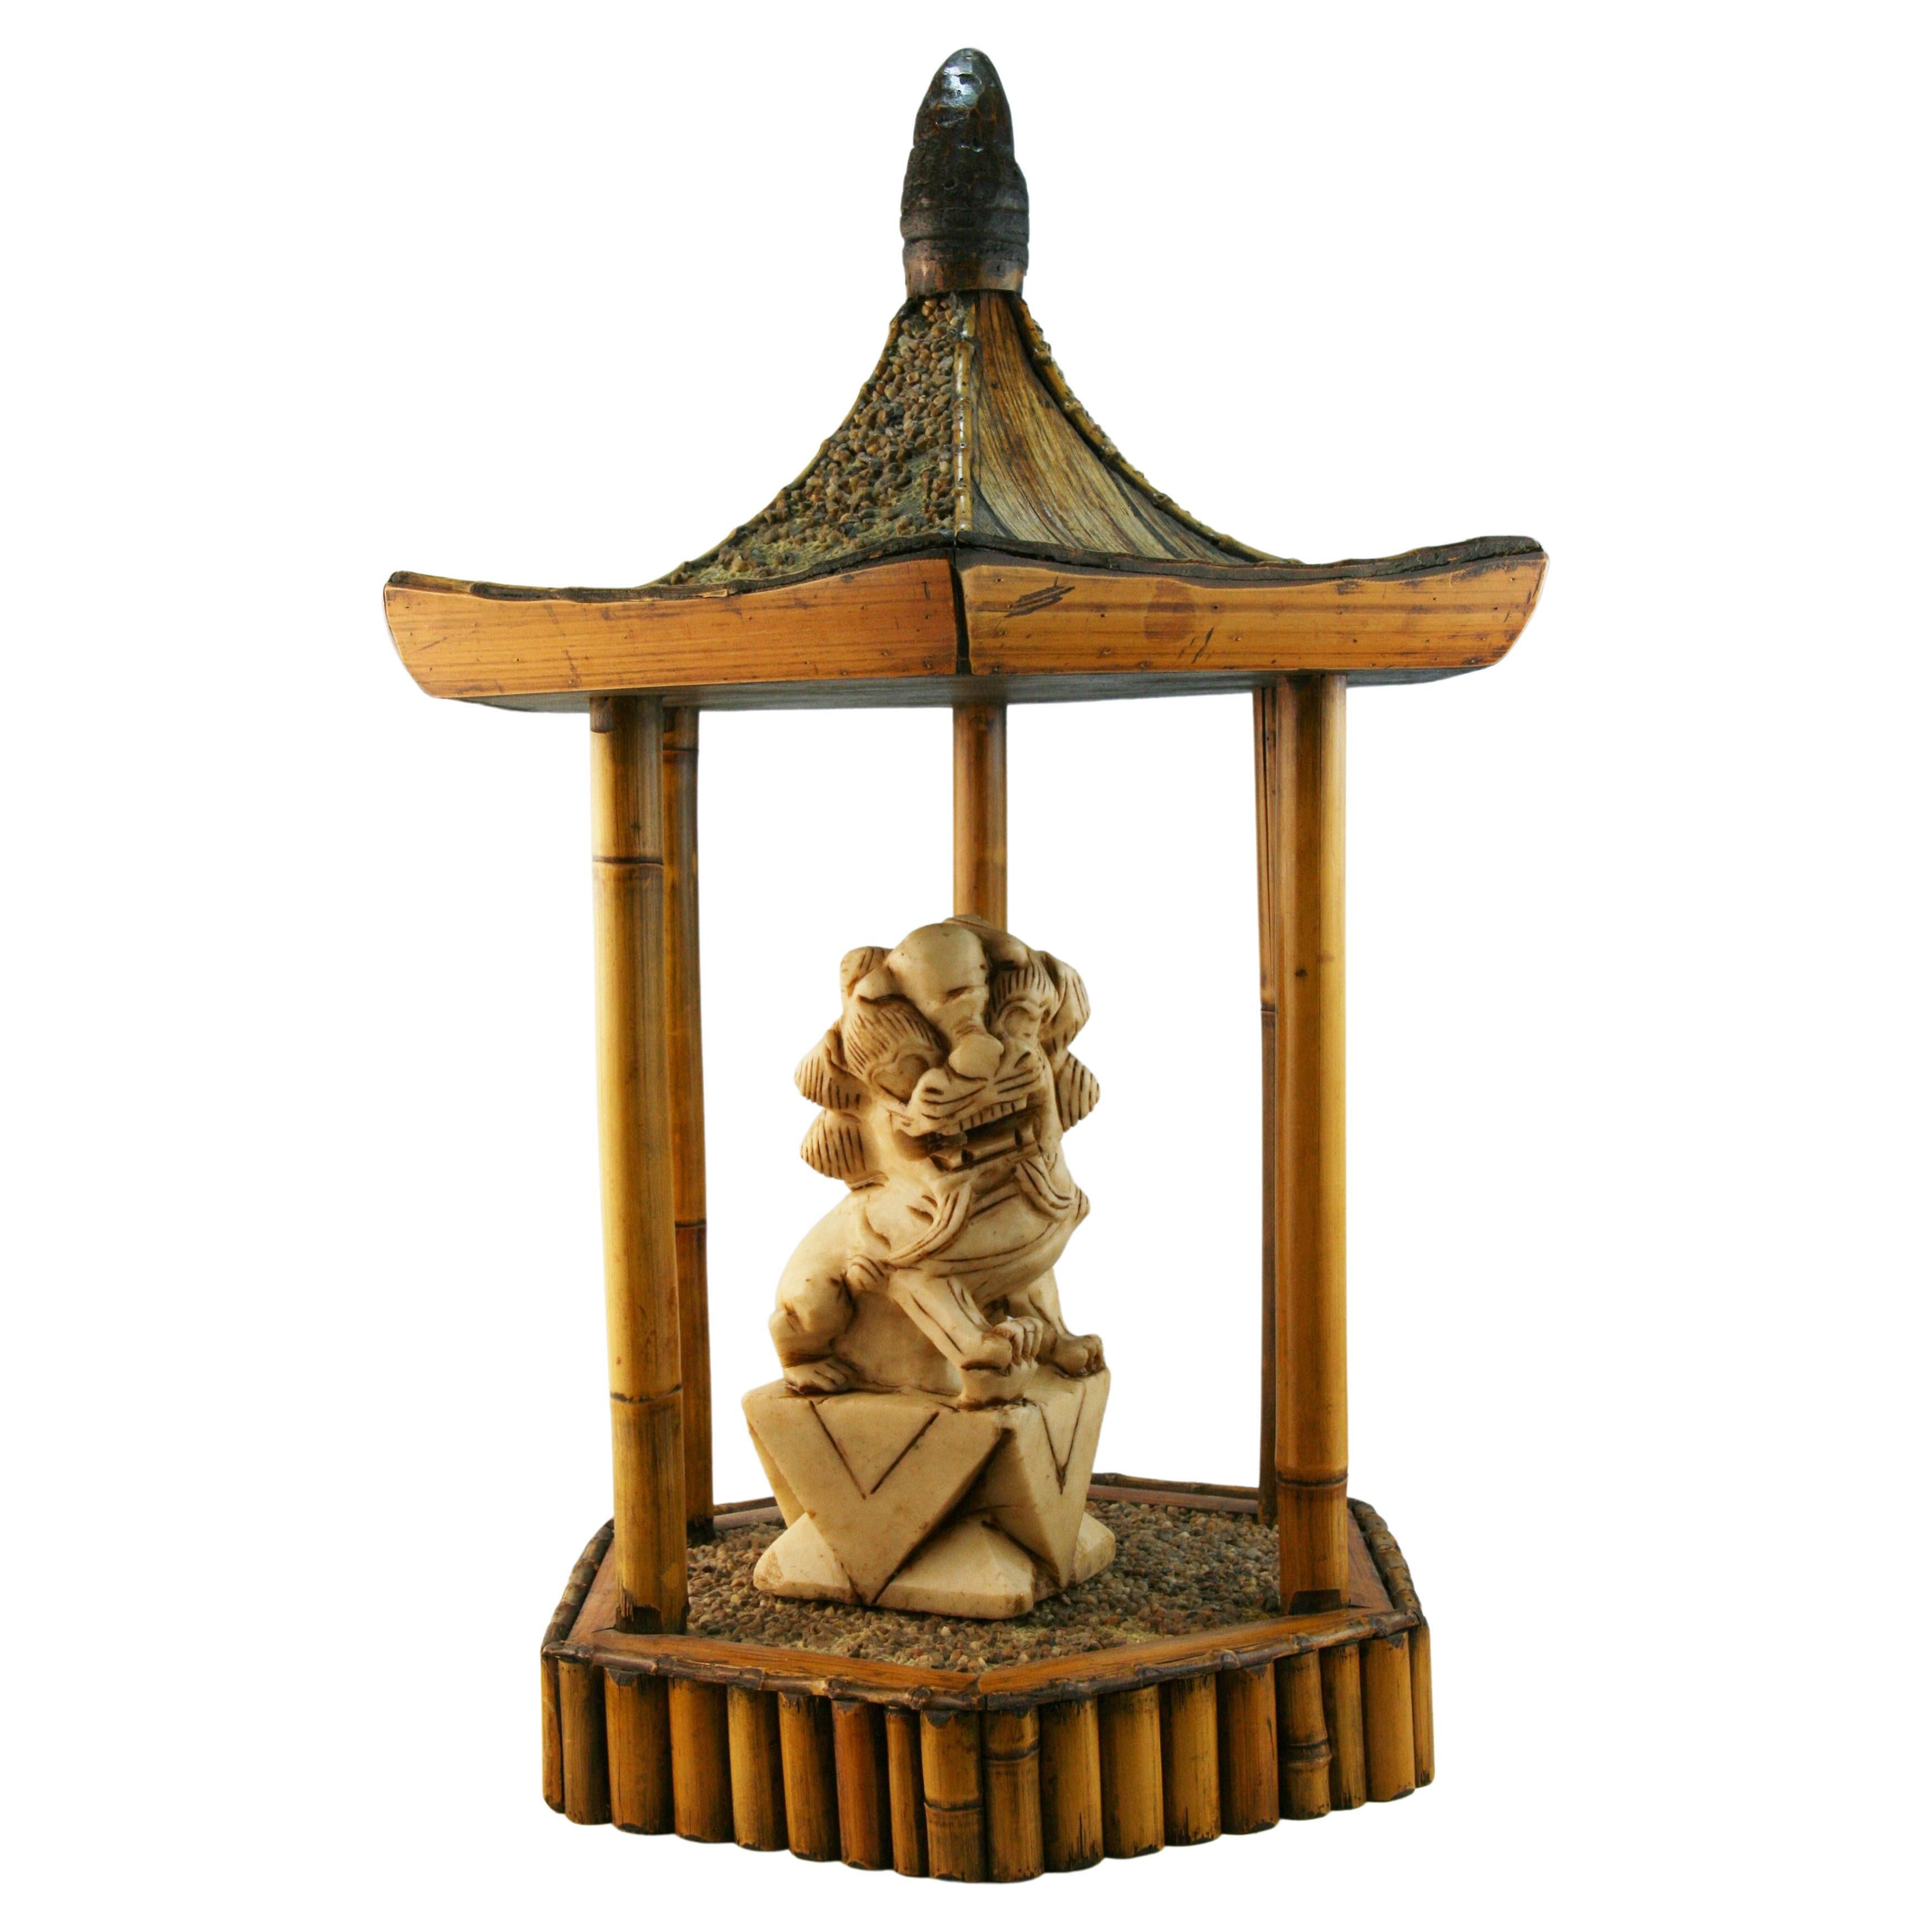 Japanese Garden Bamboo Pagoda Shrine with Carved Stone Animal For Sale